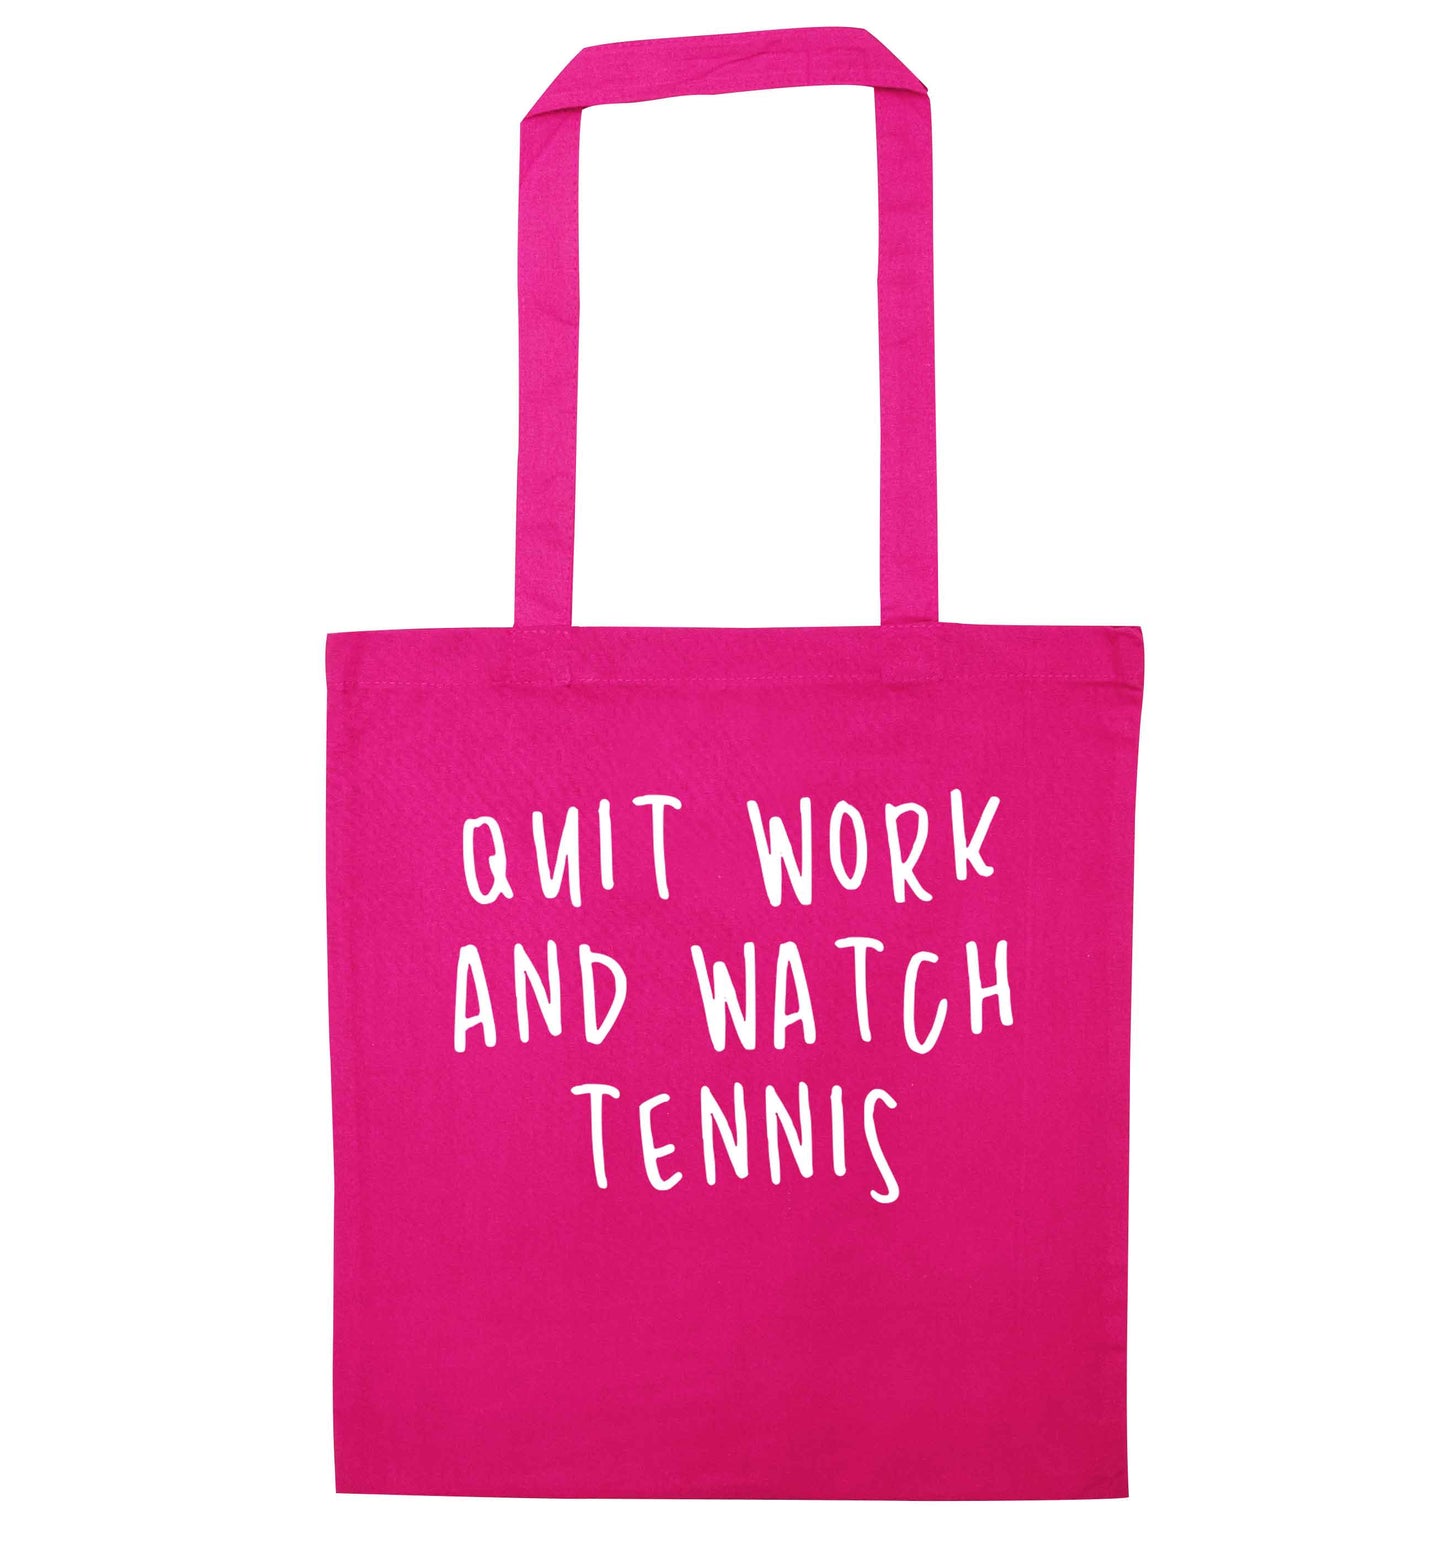 Quit work and watch tennis pink tote bag